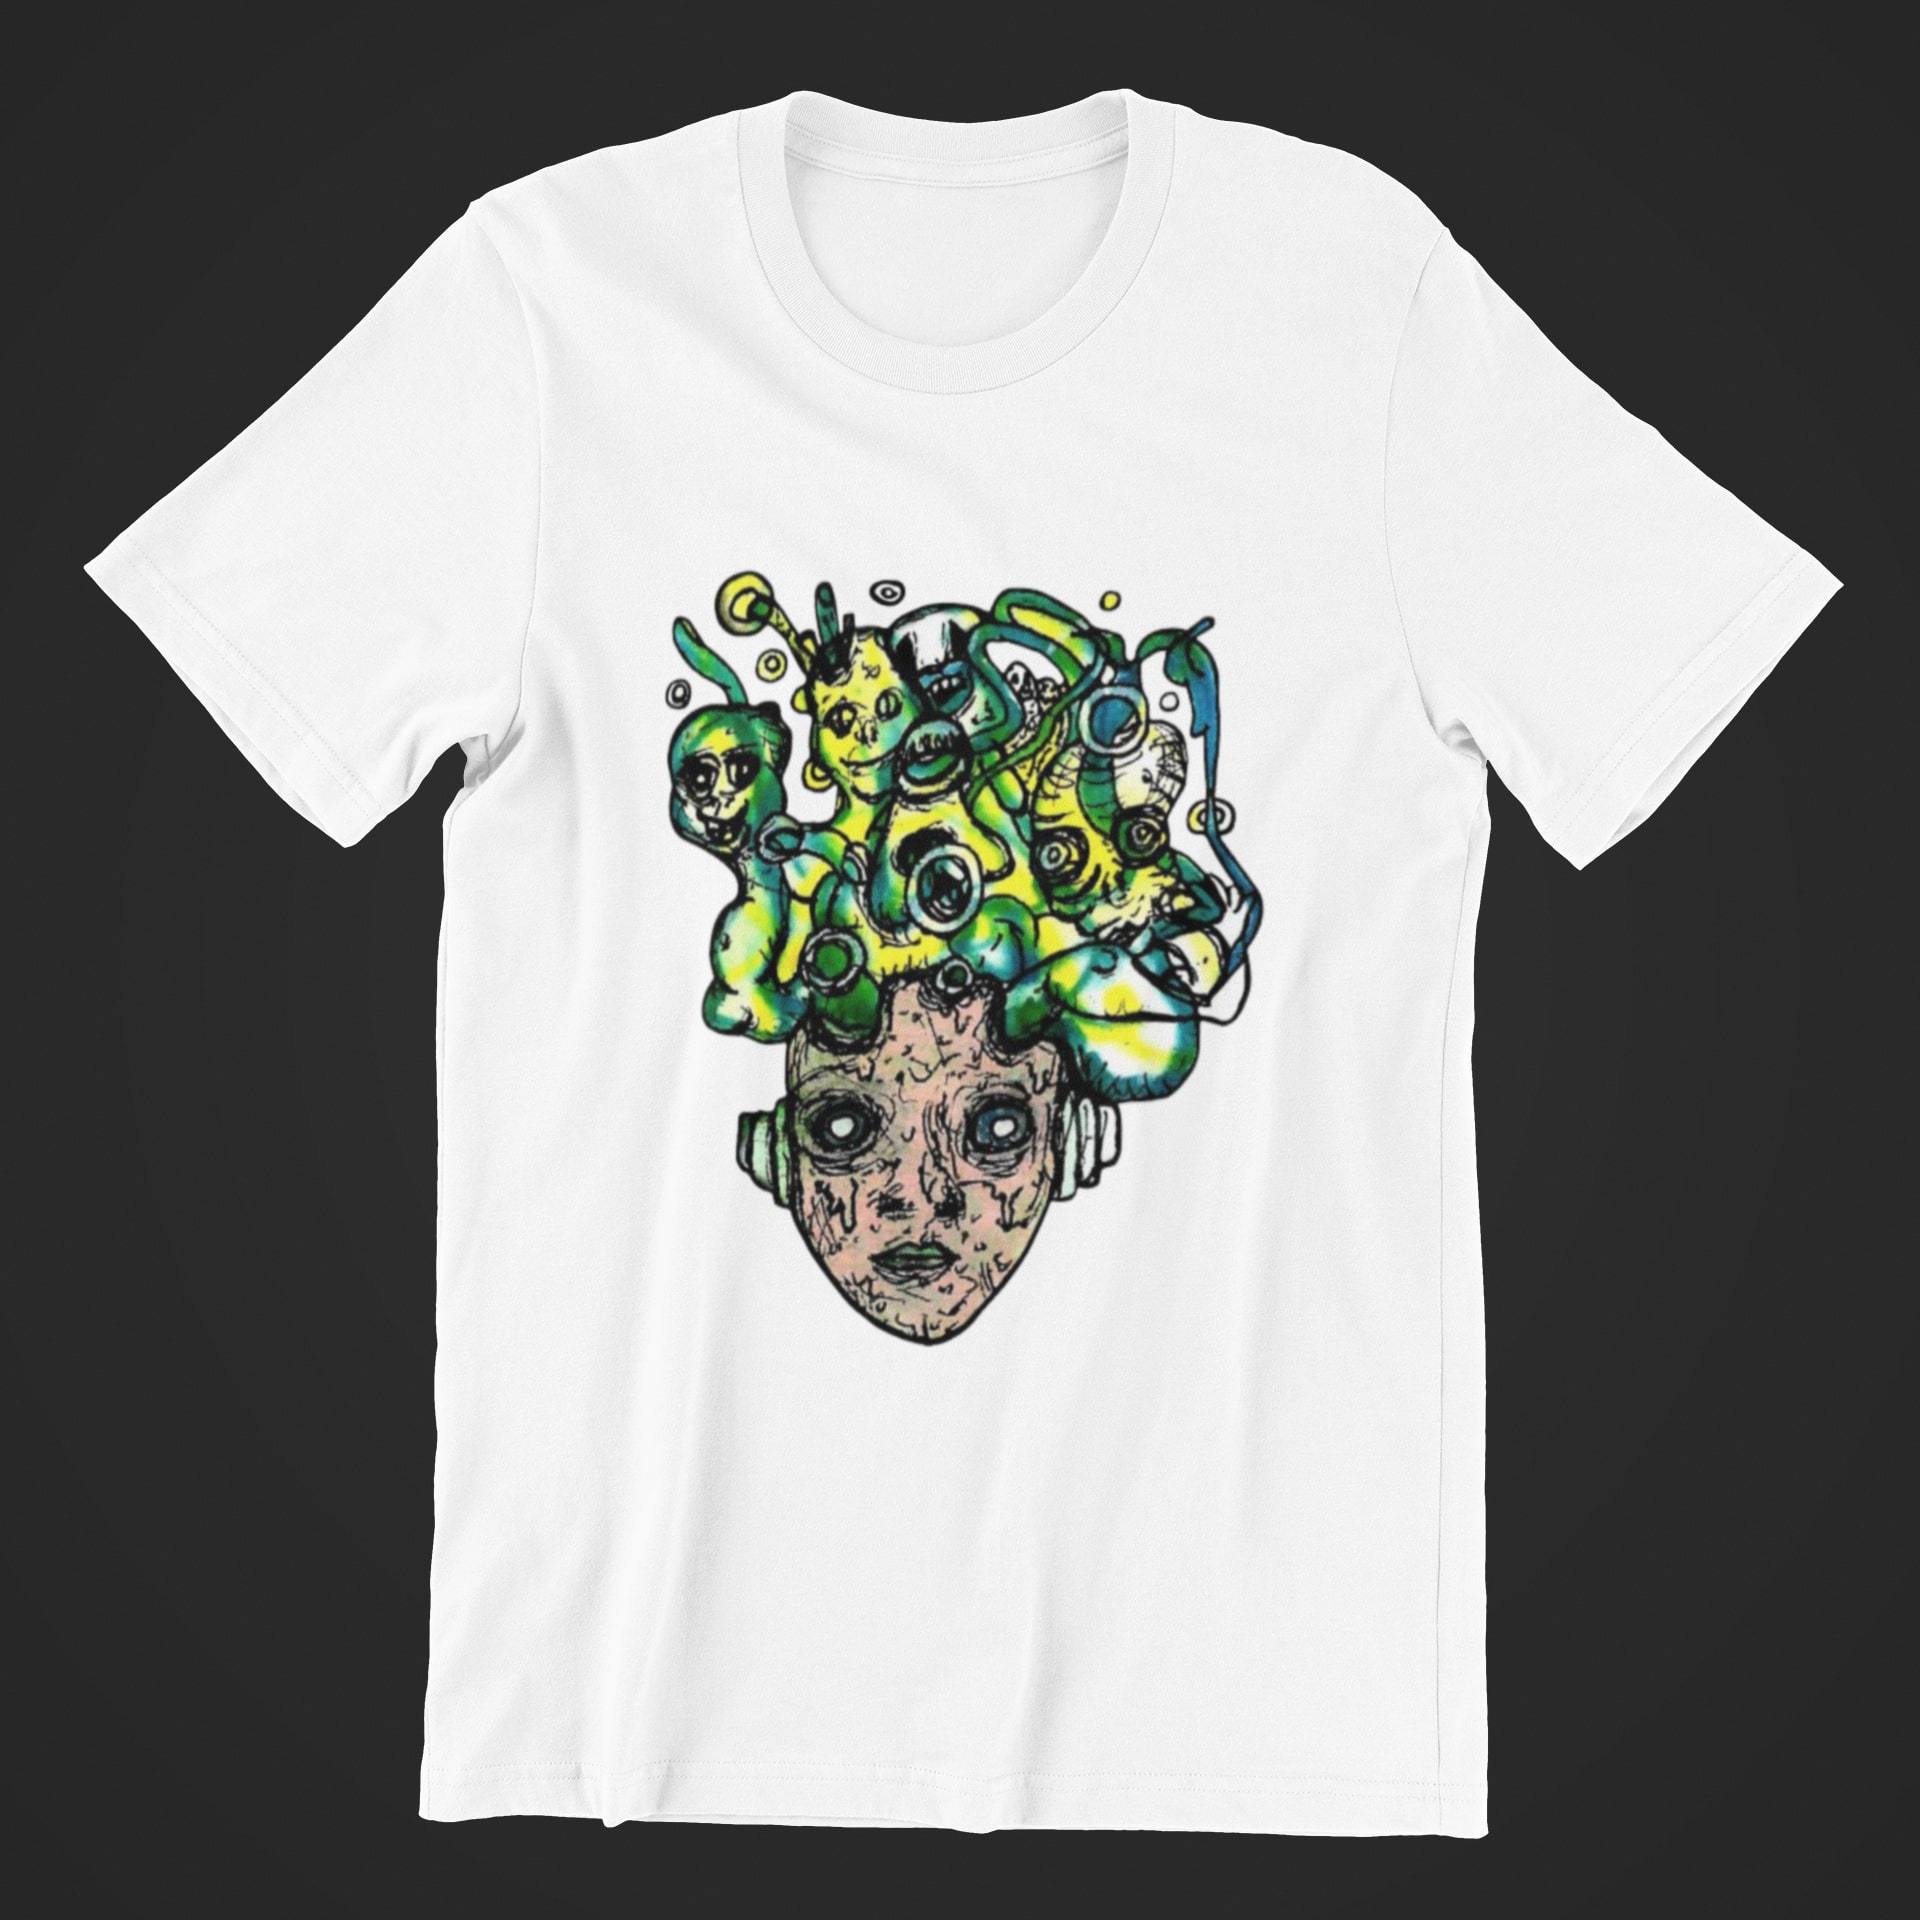 Creepy Psychedelic Inspired T shirt for Men - Insane Tees